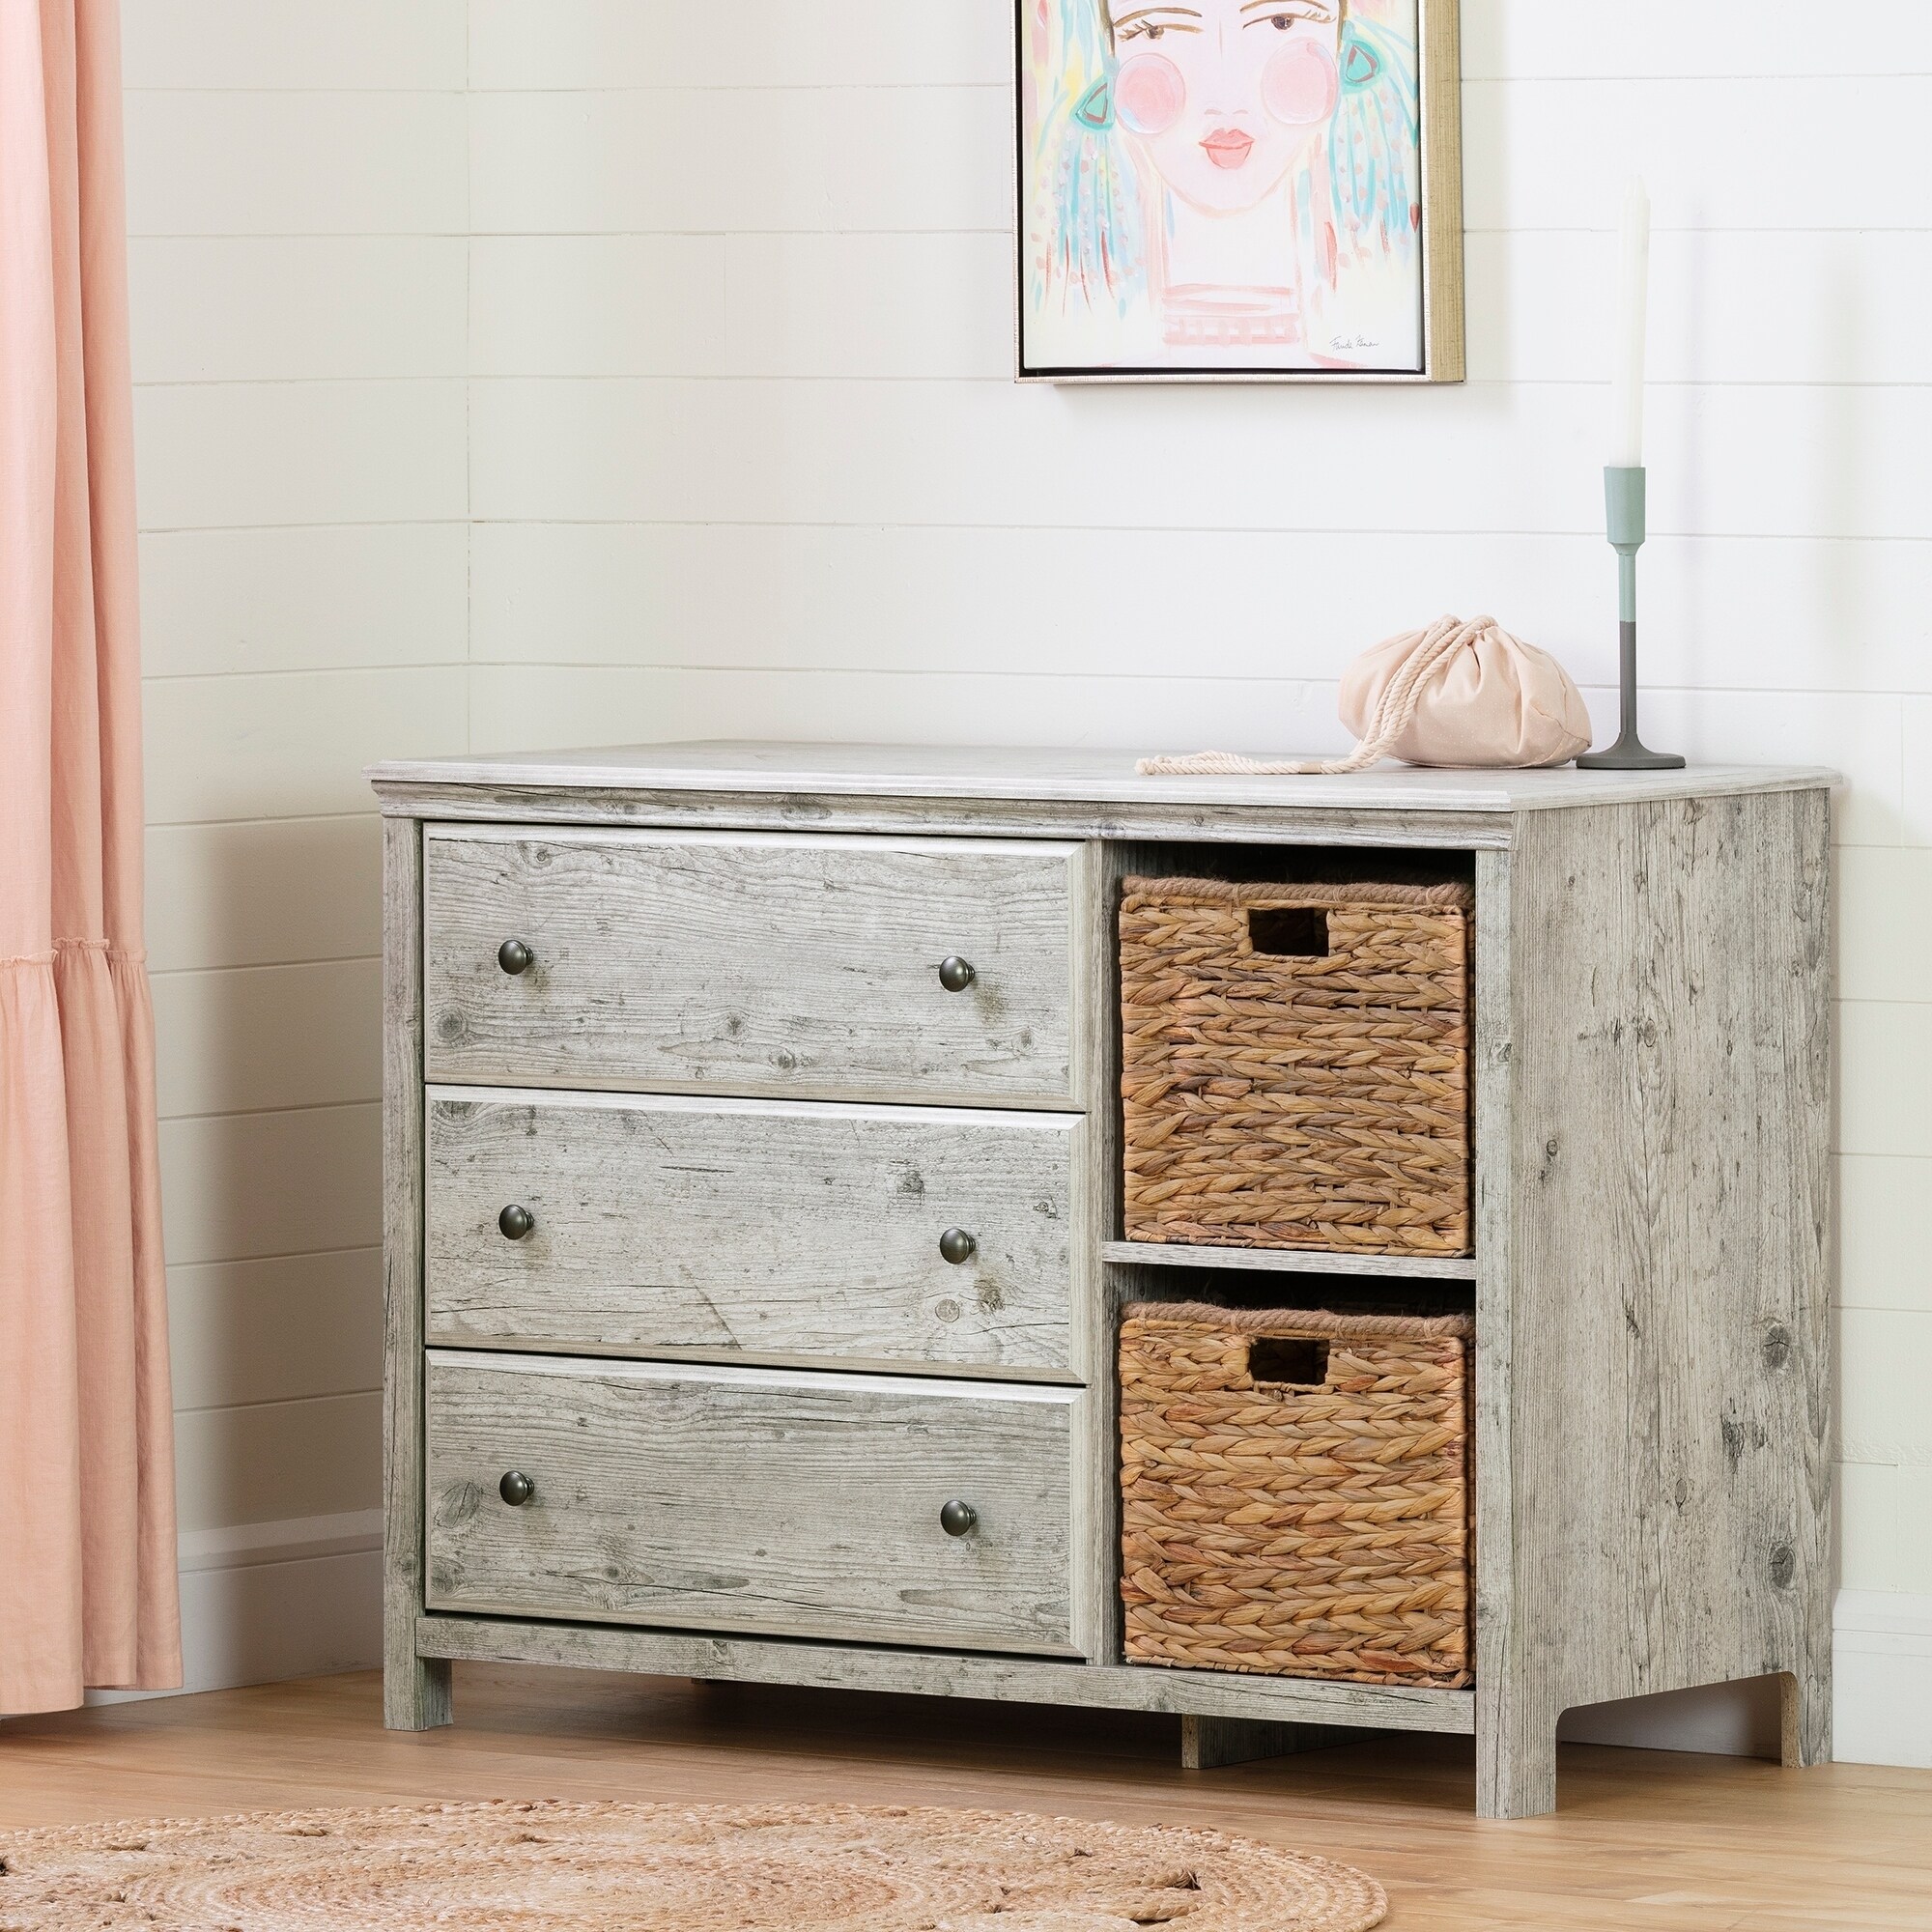 South Shore Cotton Candy 3 Drawer Dresser With Baskets Soft Gray